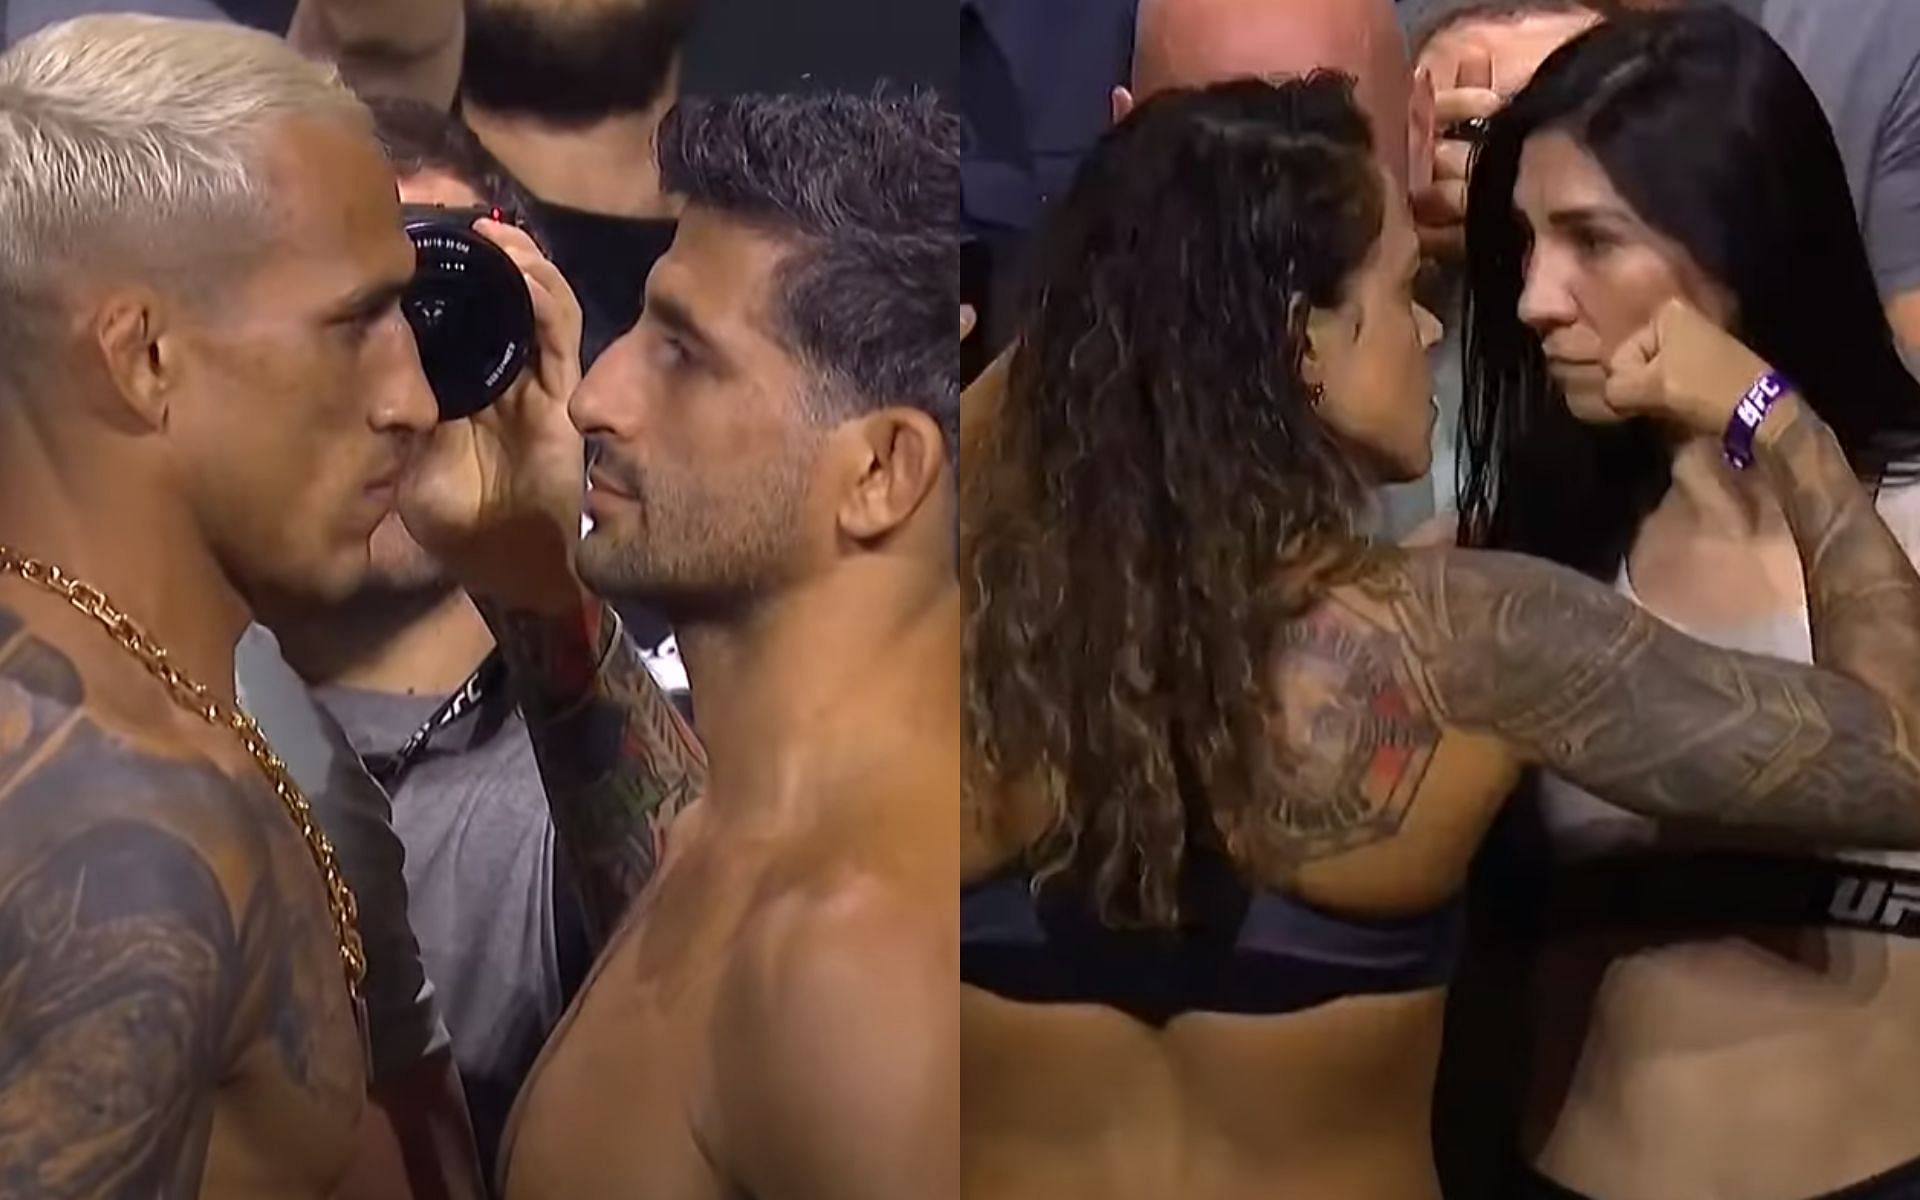 Charles Oliveira and Beneil Dariush face off ahead of their UFC 289 co-main event fight (Left); Amanda Nunes and Irene Aldana face off before their UFC 289 main event matchup [*Image courtesy: left and right images via UFC YouTube channel]